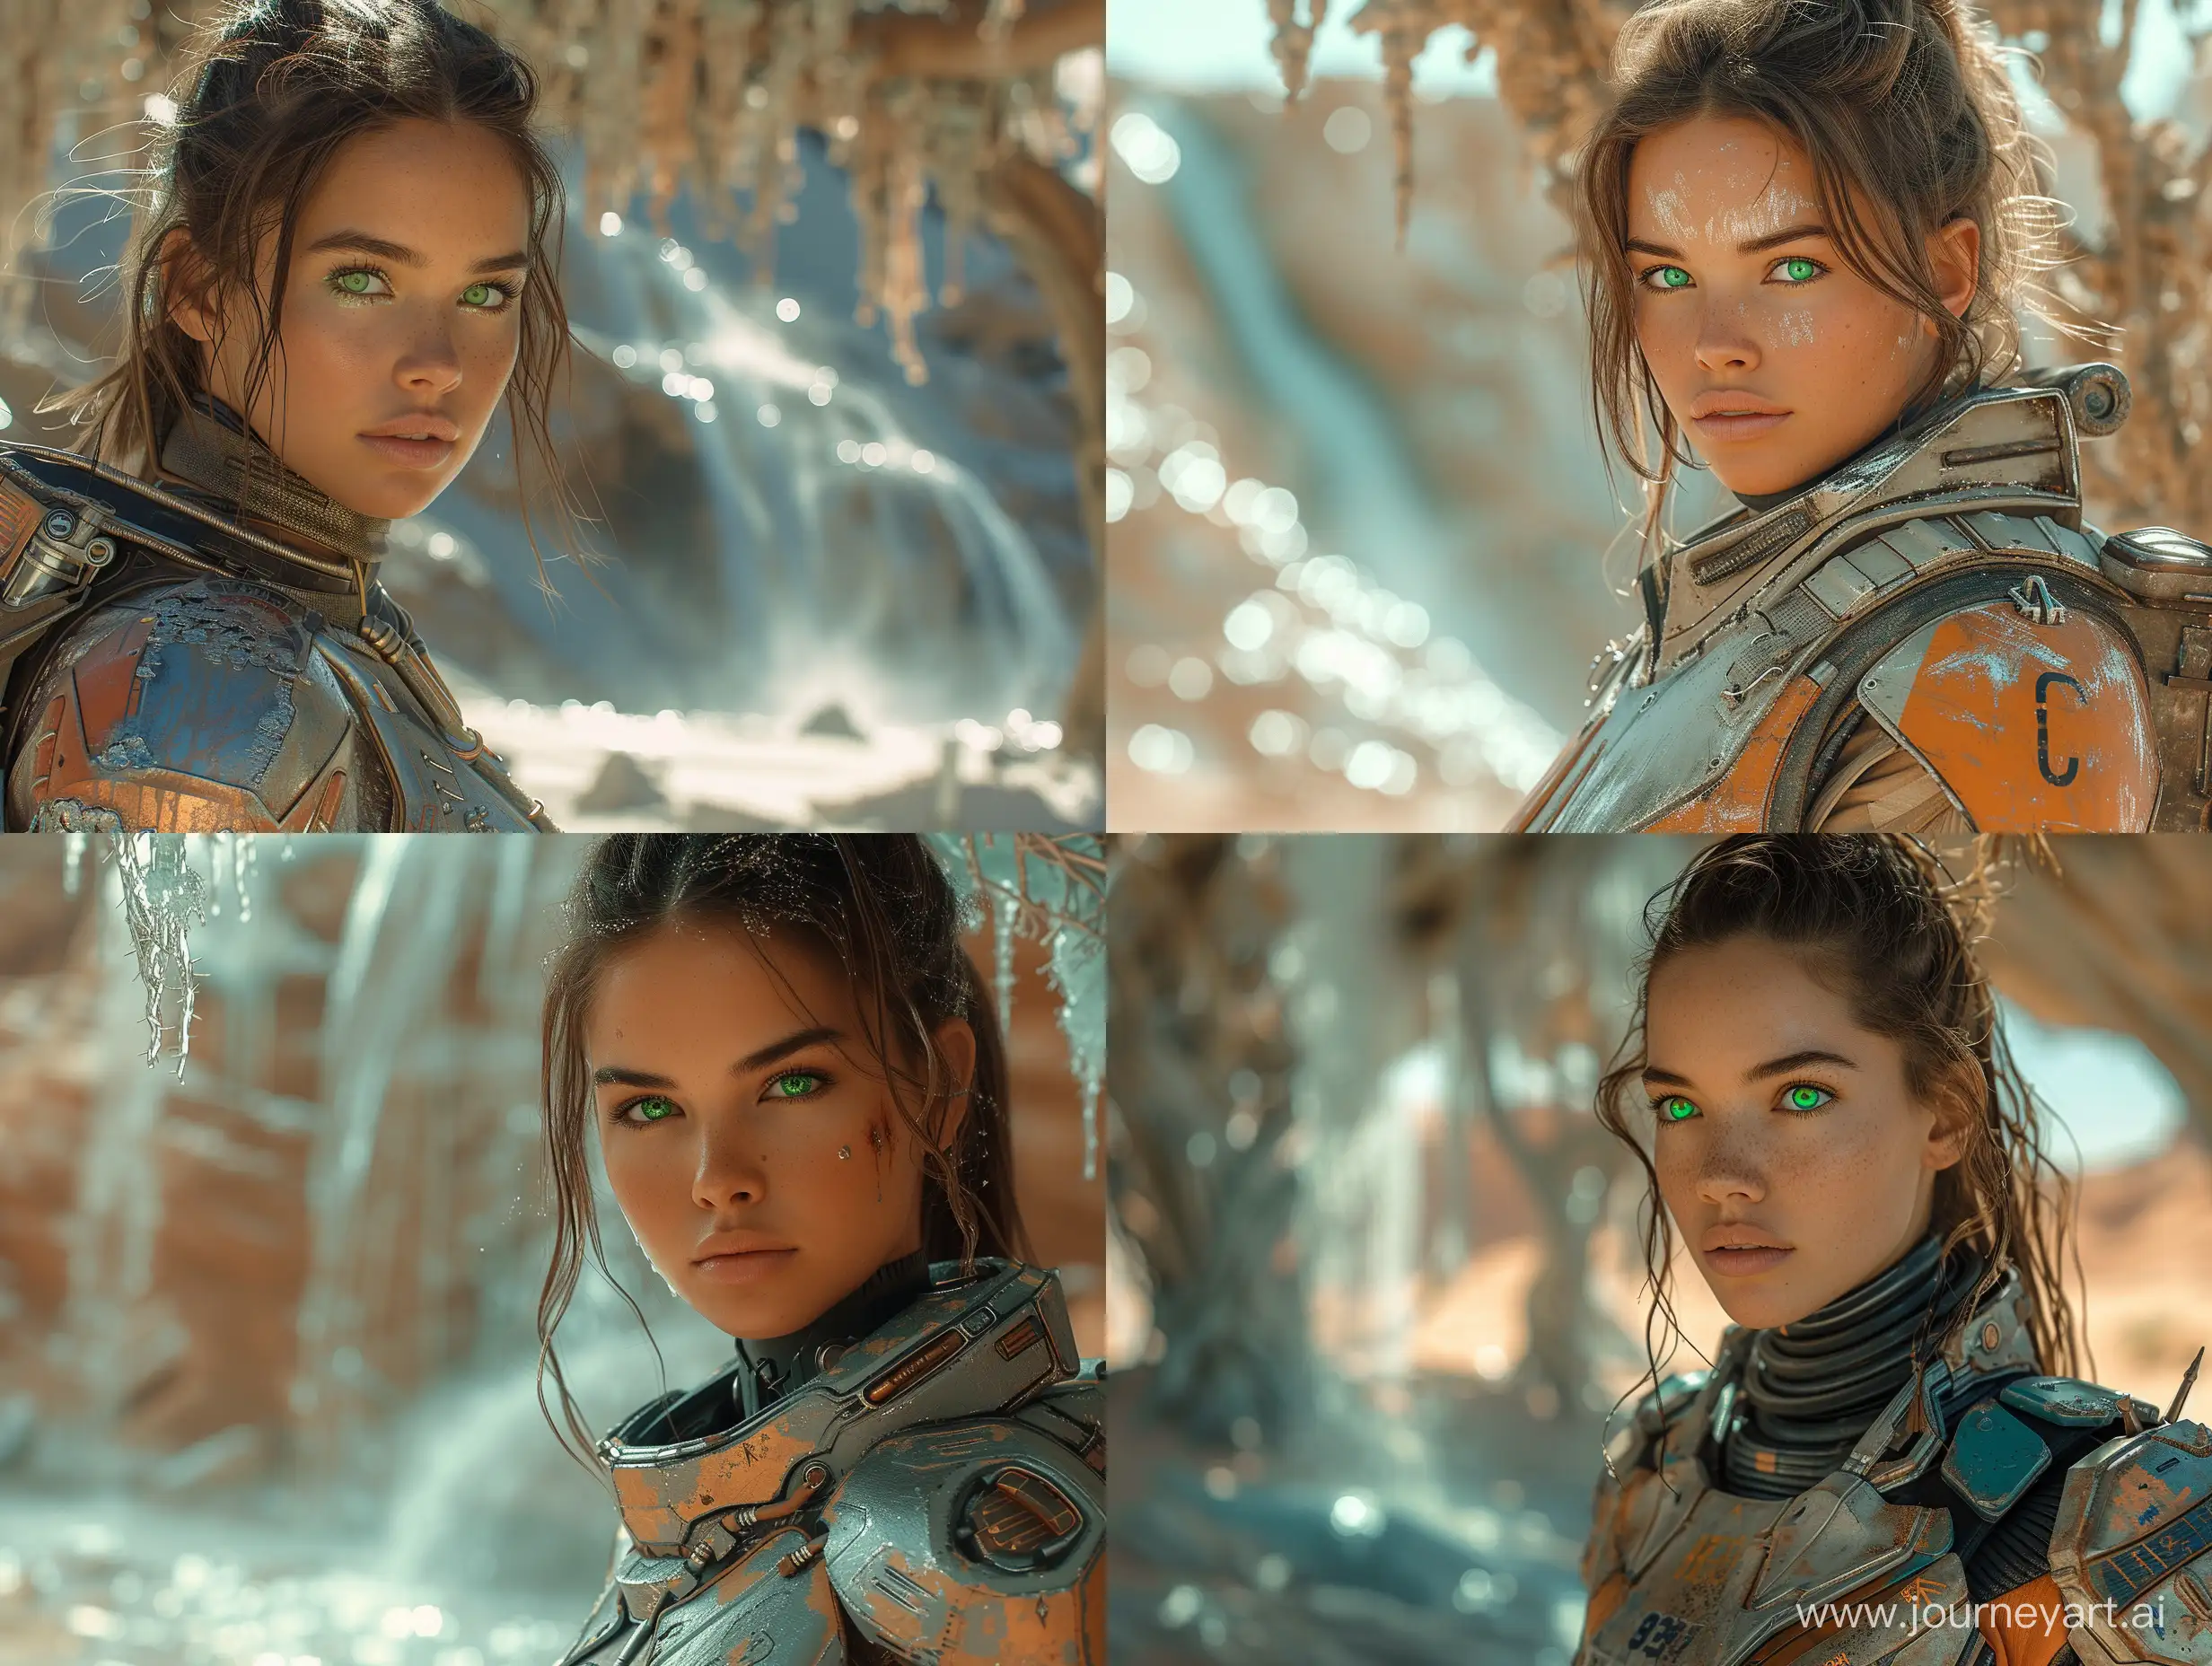 Futuristic-Desert-Warrior-with-Green-Eyes-and-Silver-Water-Cascade